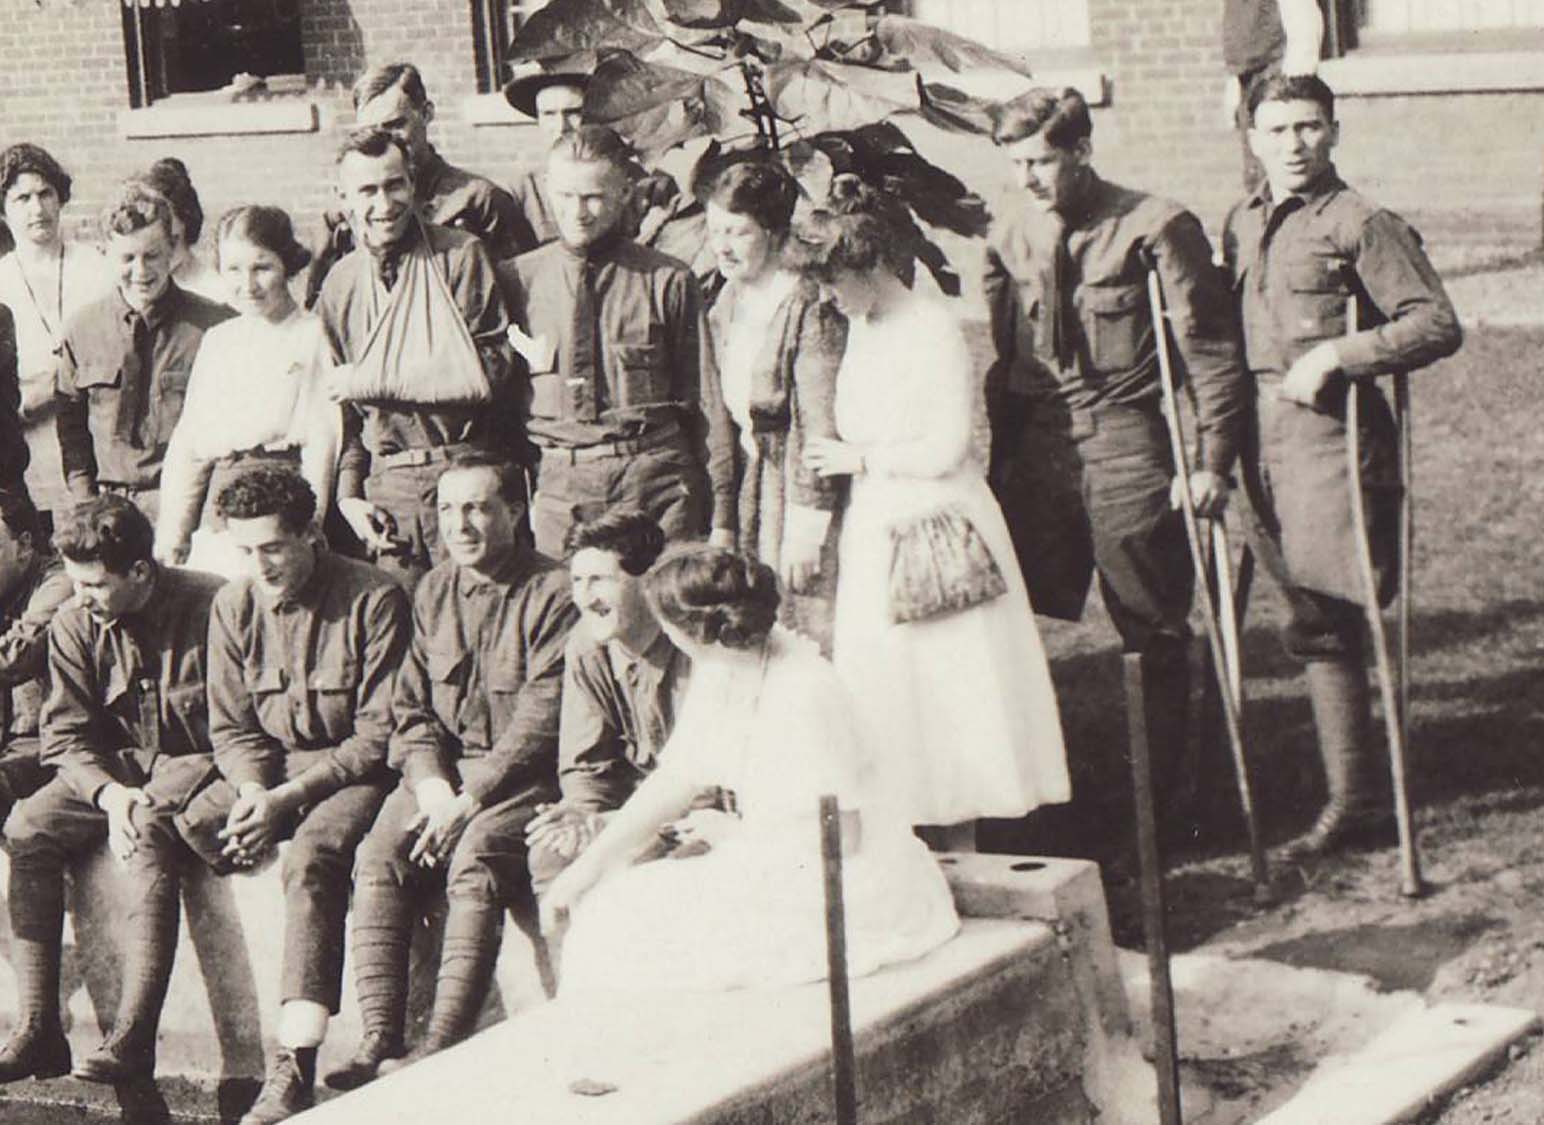 Members of the Laurel Club and wounded veterans from the hospital in Colonia during one of the events at Johnson & Johnson, 1919.  Image courtesy: Johnson & Johnson Archives.